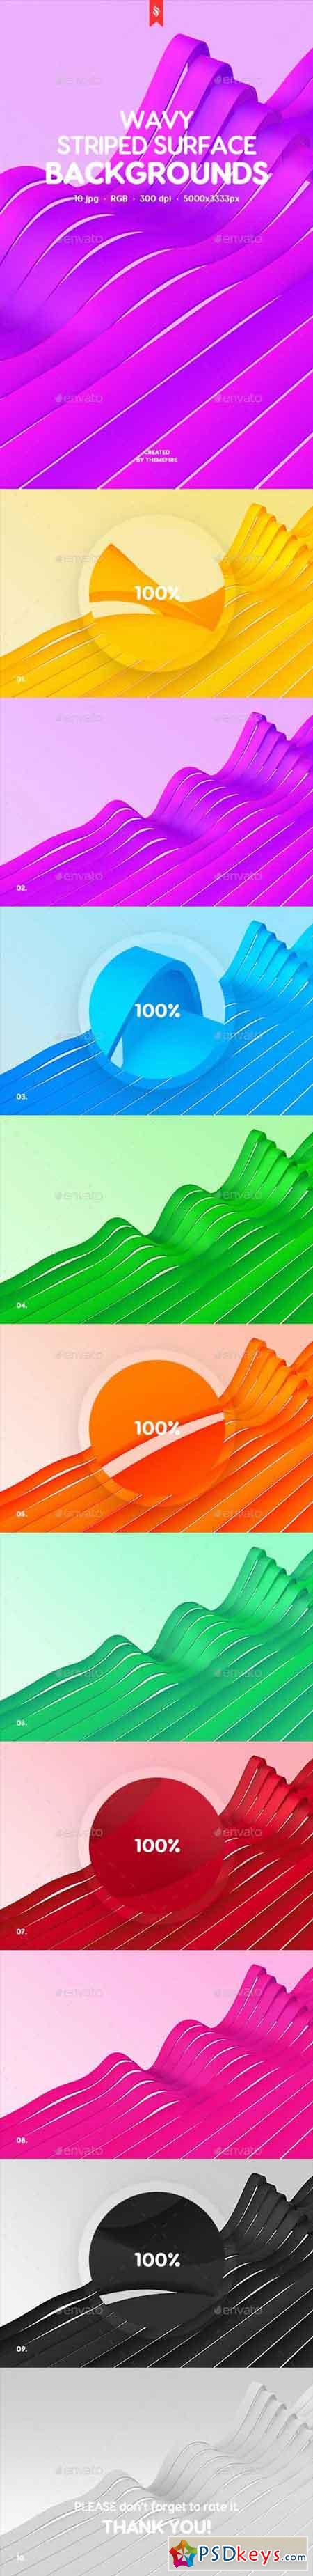 Wavy Striped Surface Backgrounds 20740358